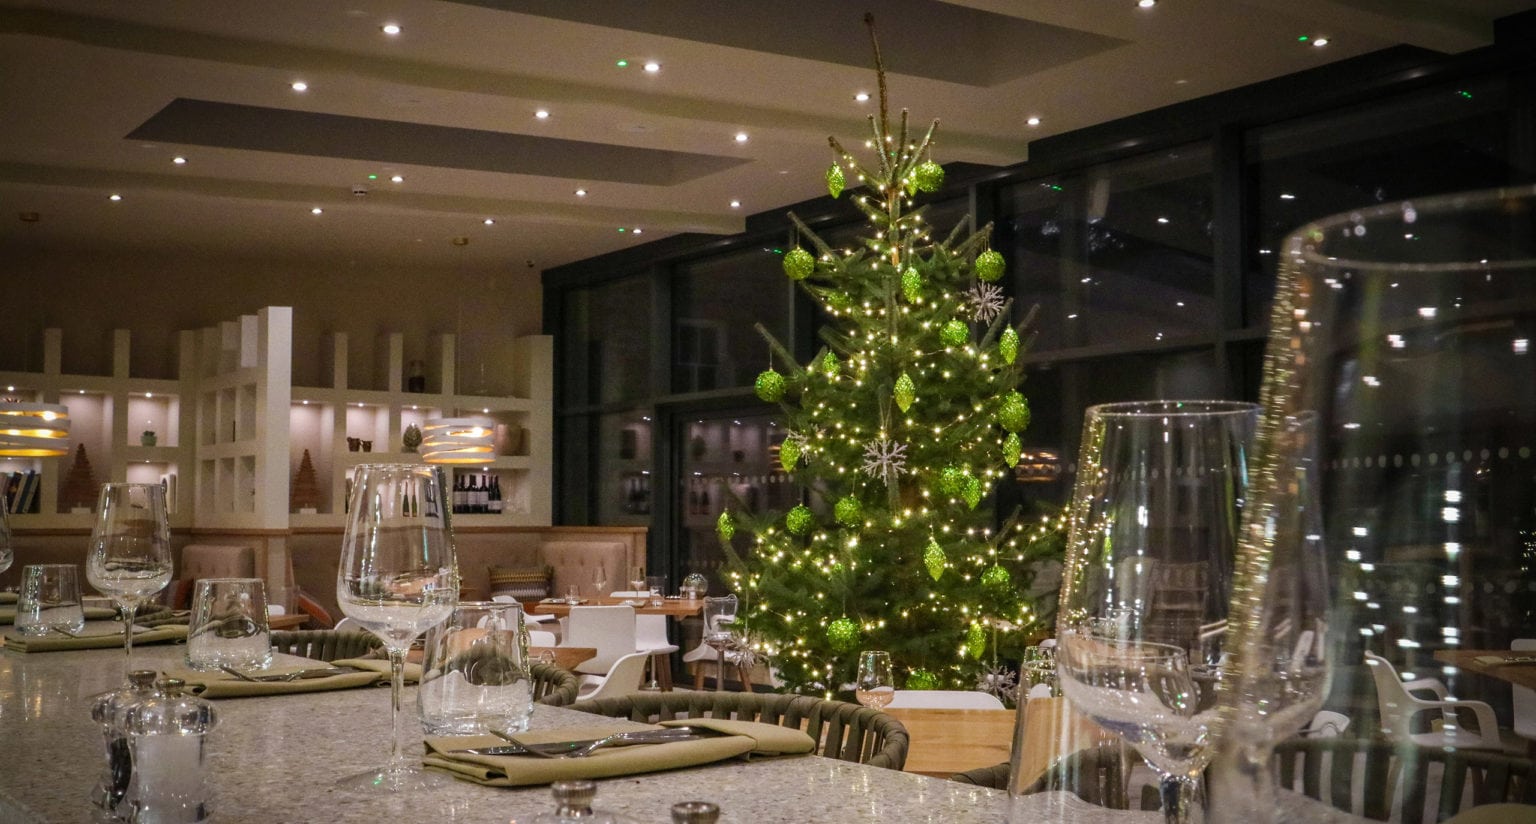 A Christmas tree in The Terrace Restaurant and Bar on the Swinton Estate in North Yorkshire